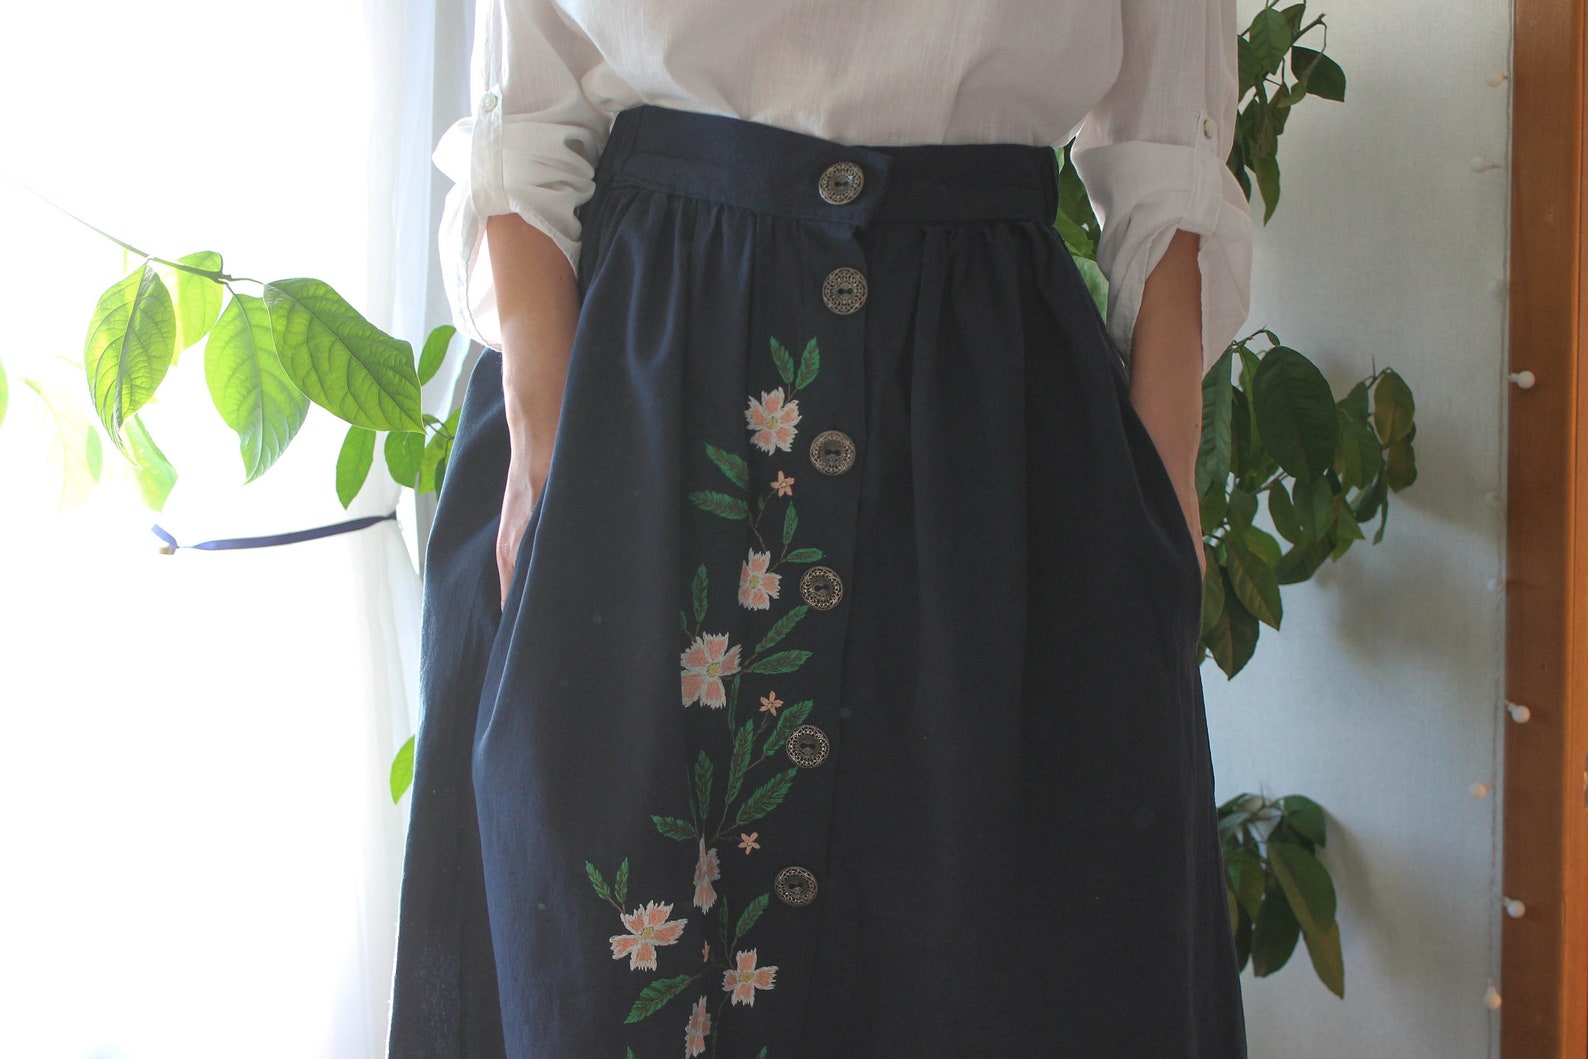 Linen skirt Embroidered / skirt with buttons / hand embroidery | Etsy